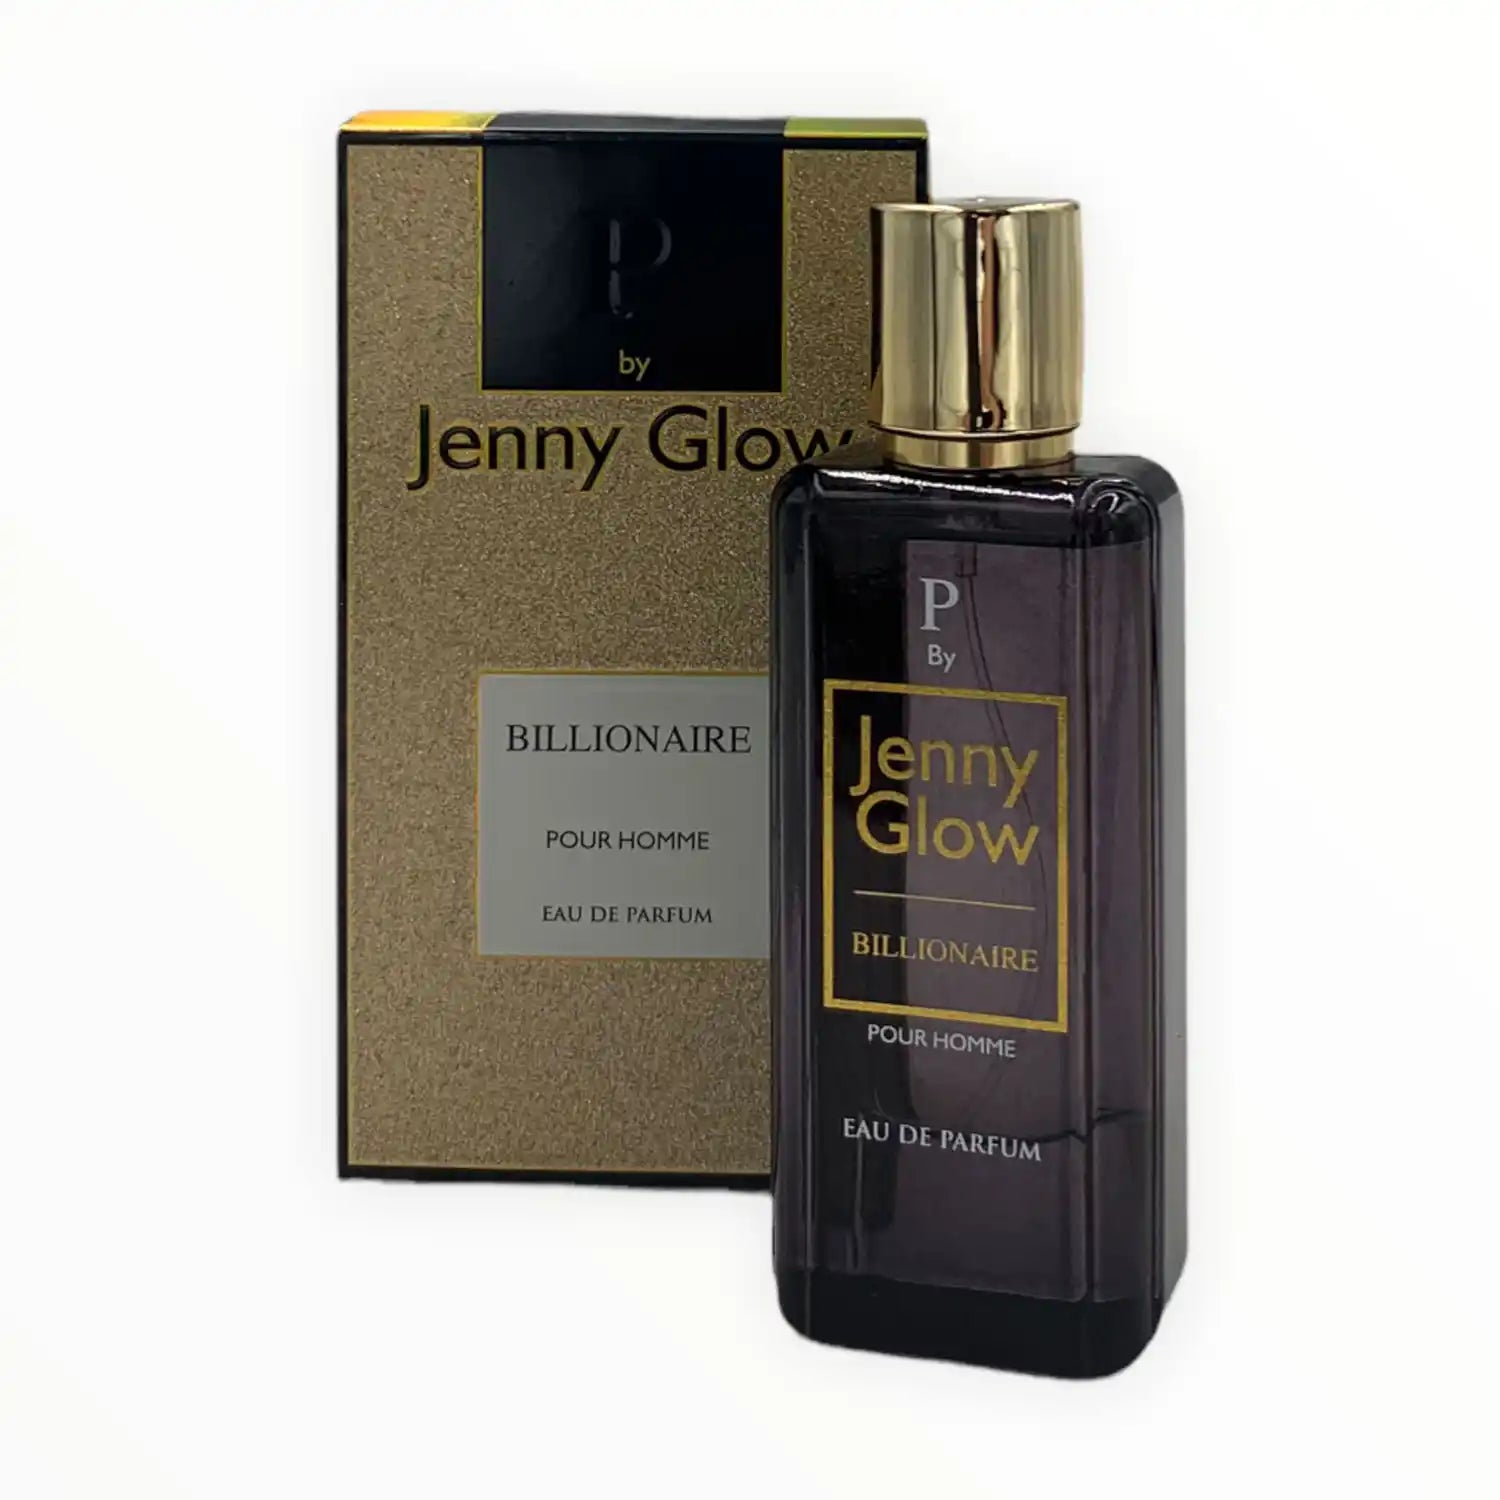 Jenny Glow DR by Jenny Glow Billionaire Pour Homme 50ml 1 Shaws Department Stores